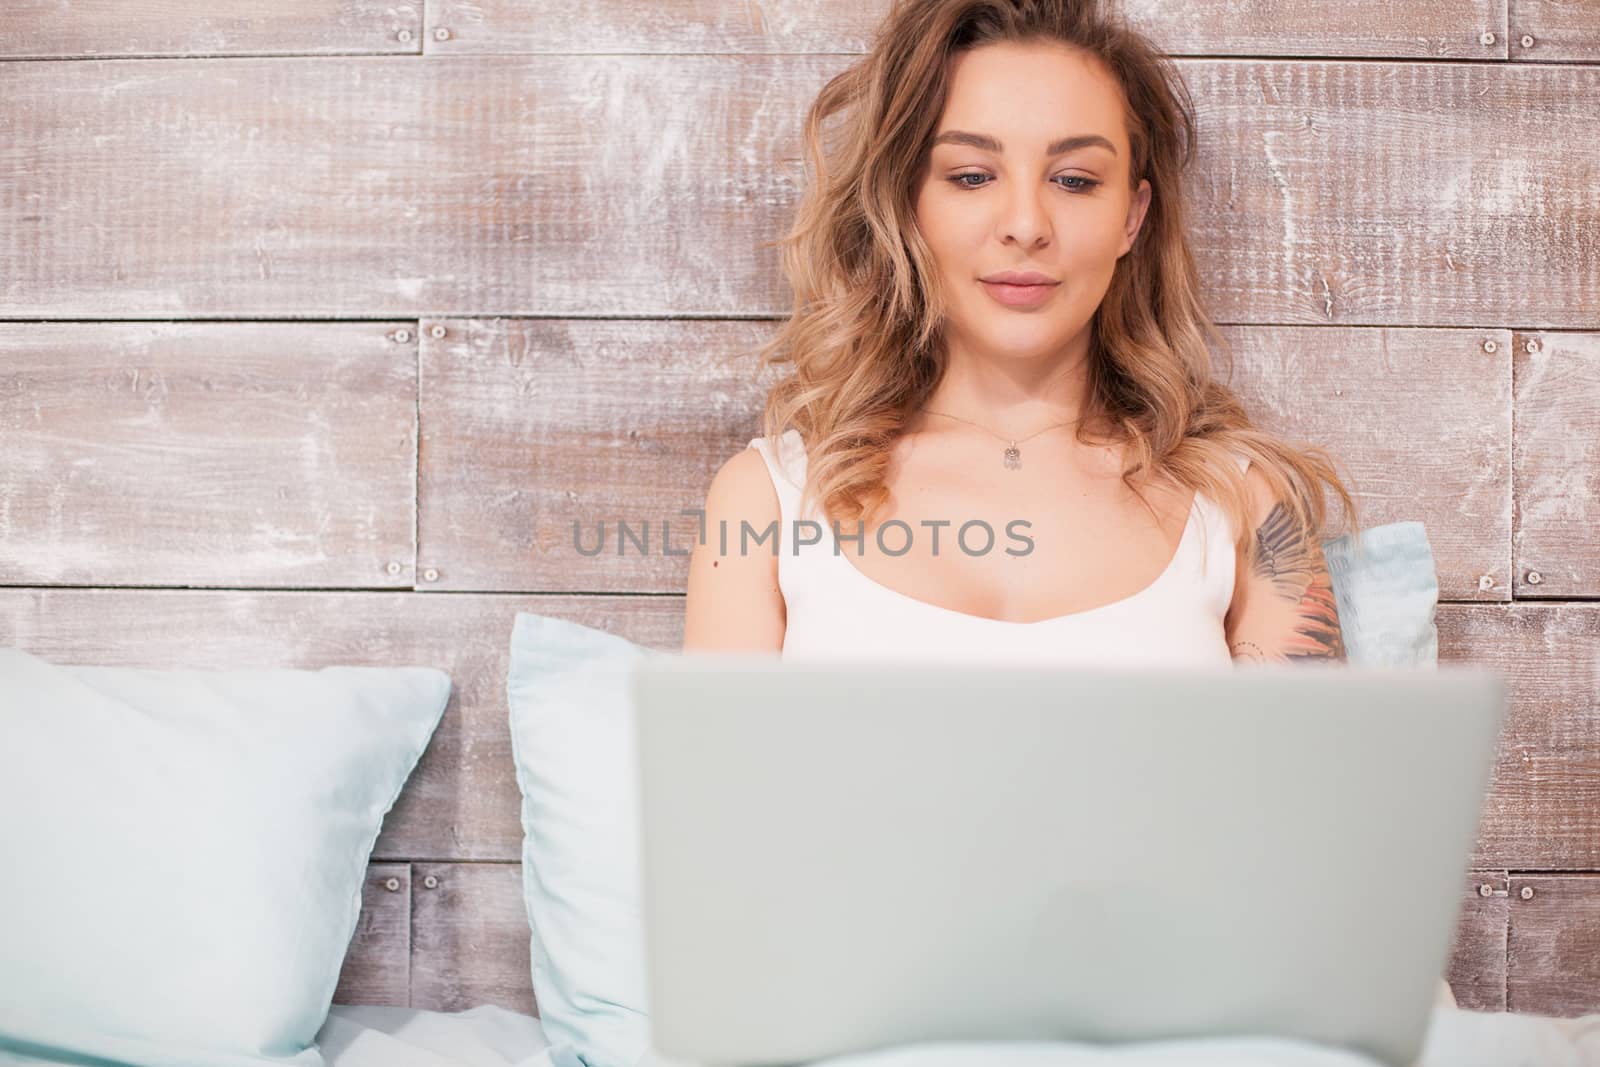 Pretty blonde woman working late at night on her laptop by DCStudio